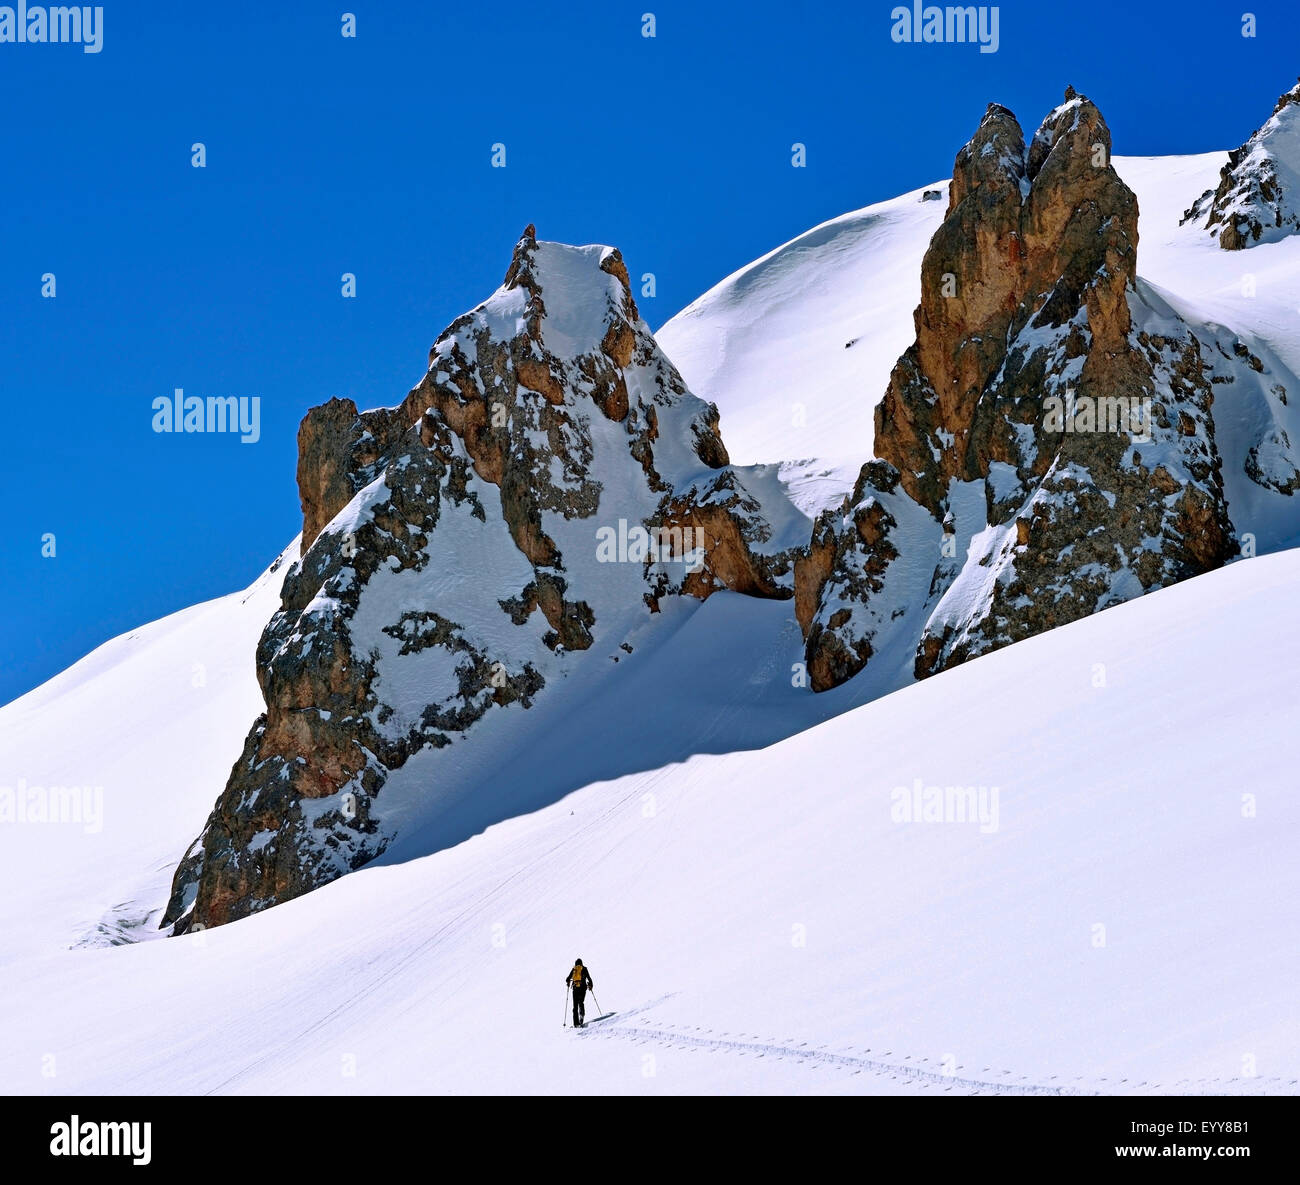 ski touring in snow covered French Alps, France, Savoie, Vanoise National Park, Courchevel Stock Photo